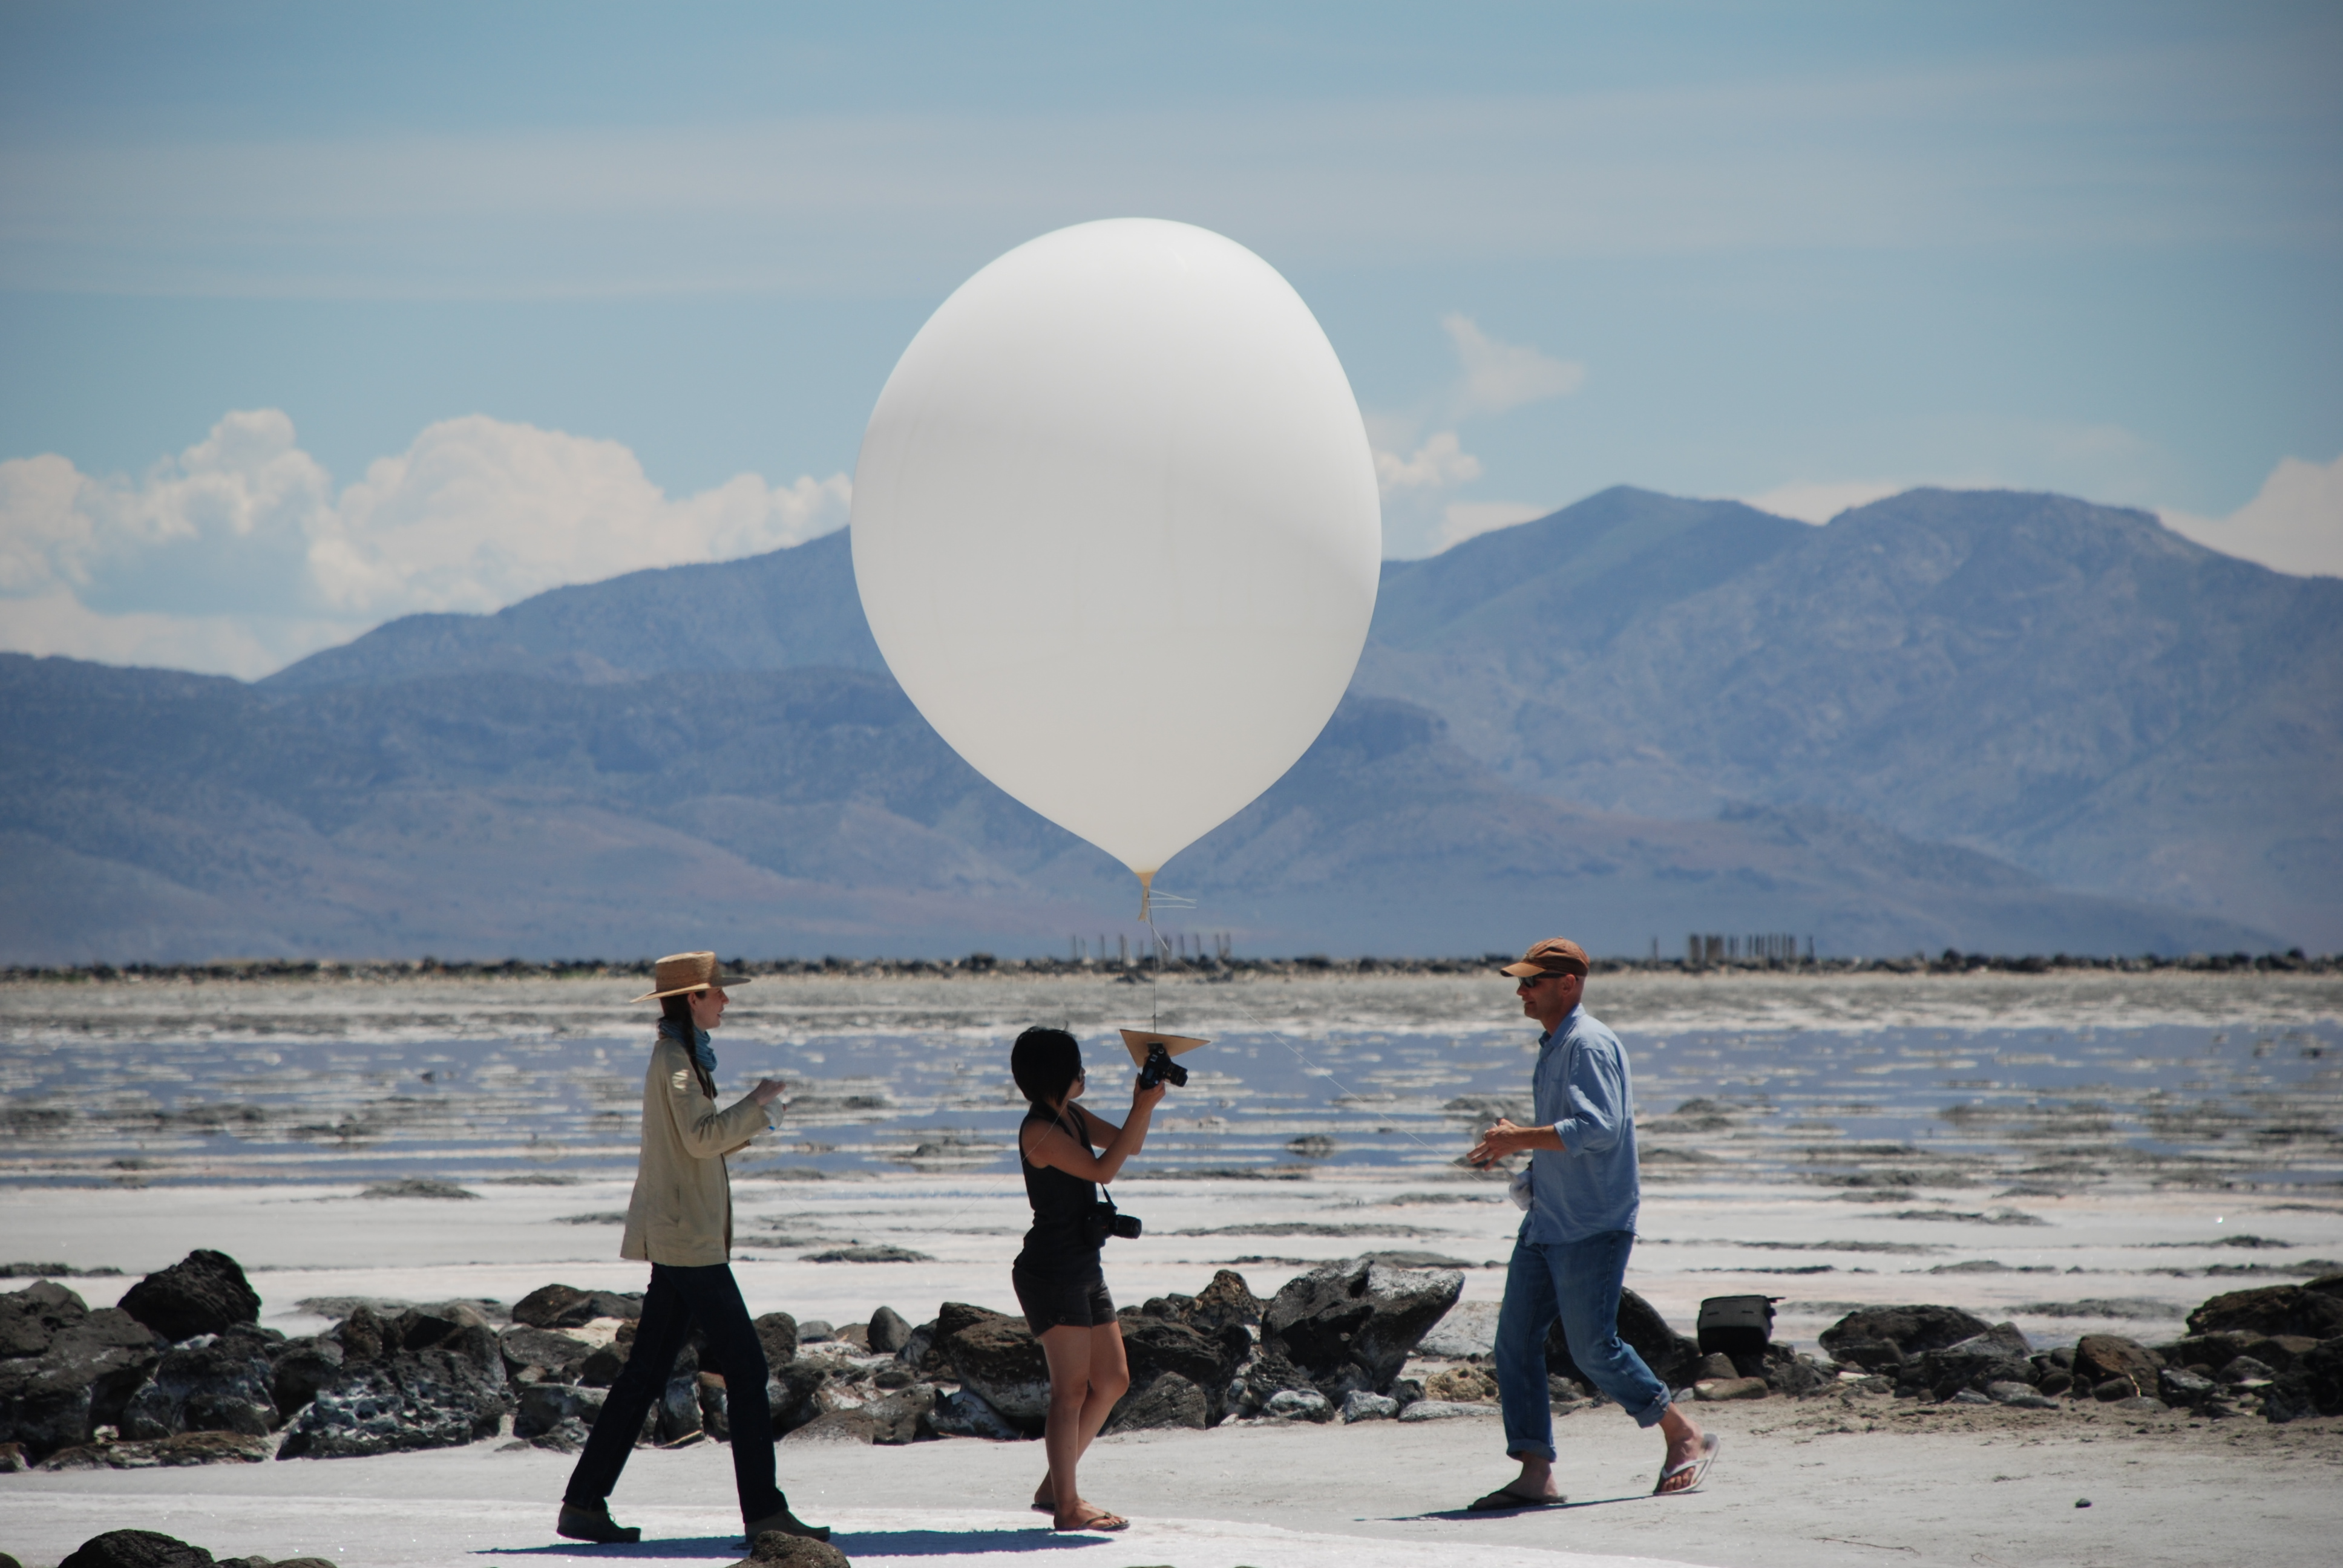 image-1-francesca-esmay-aura-tang-and-rand-eppich-prepare-to-lauch-a-tethered-helium-balloon-with-digital-camera-attached-photo-by-katie-stone-sonnenborn2